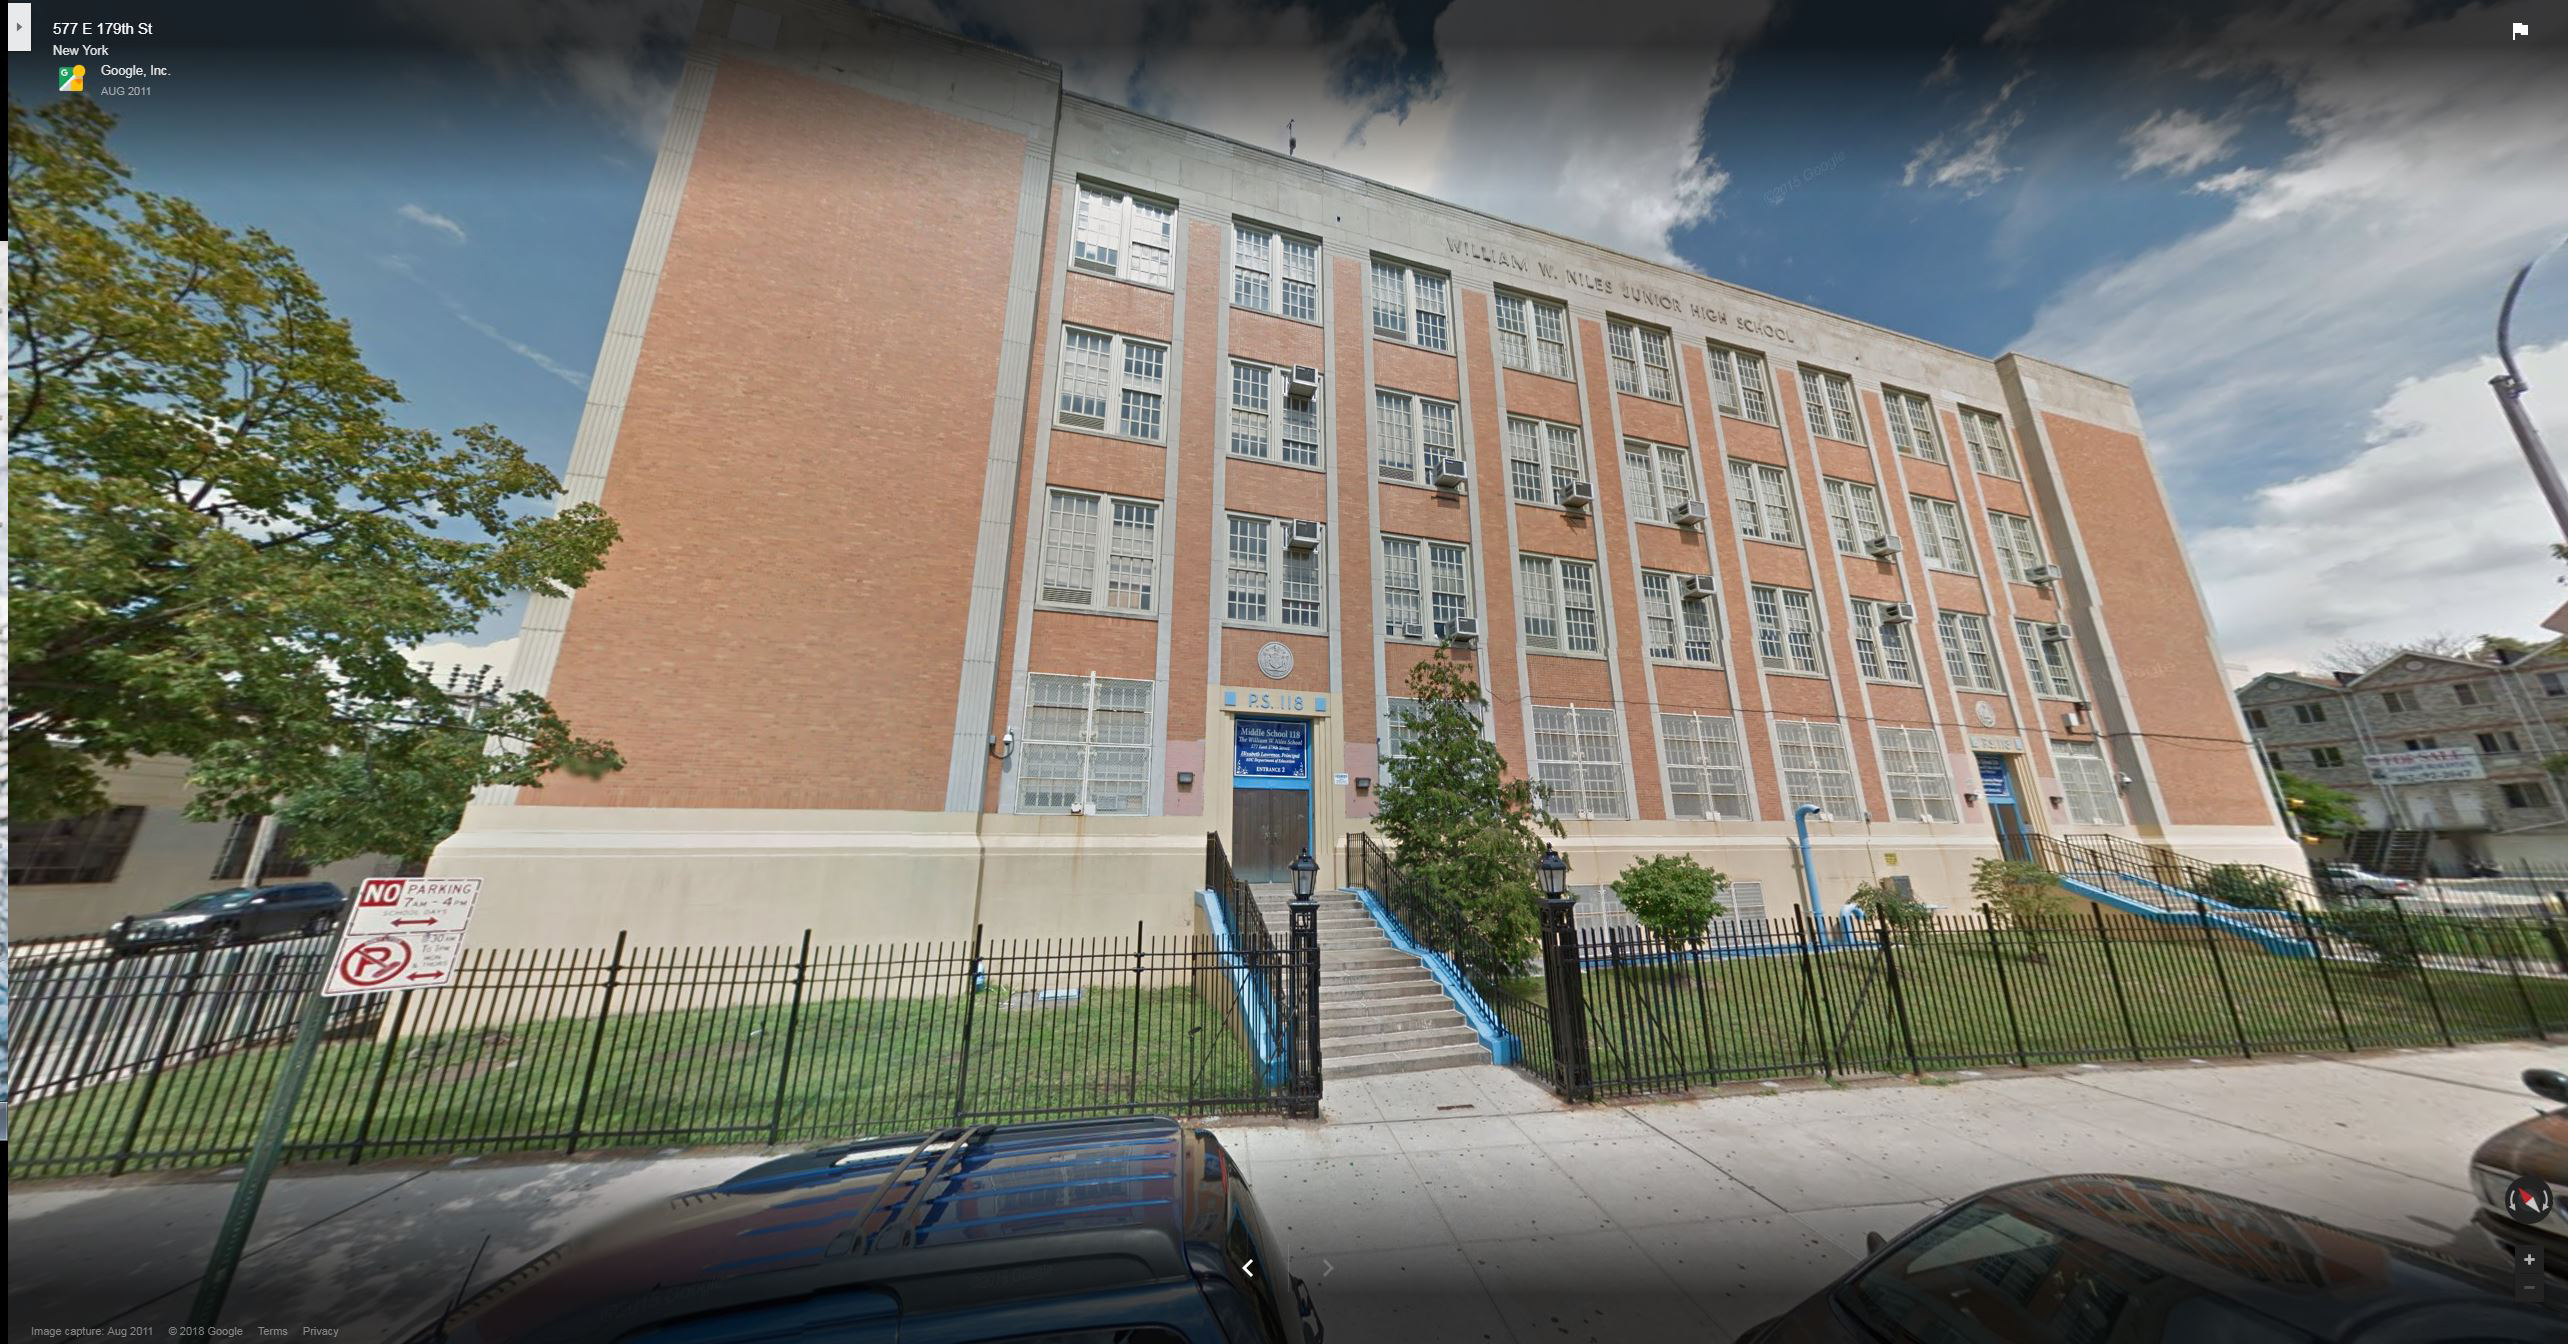 PHOTO: An exterior shot of the William W. Niles School, M.S. 118, in the Bronx borough of New York City.